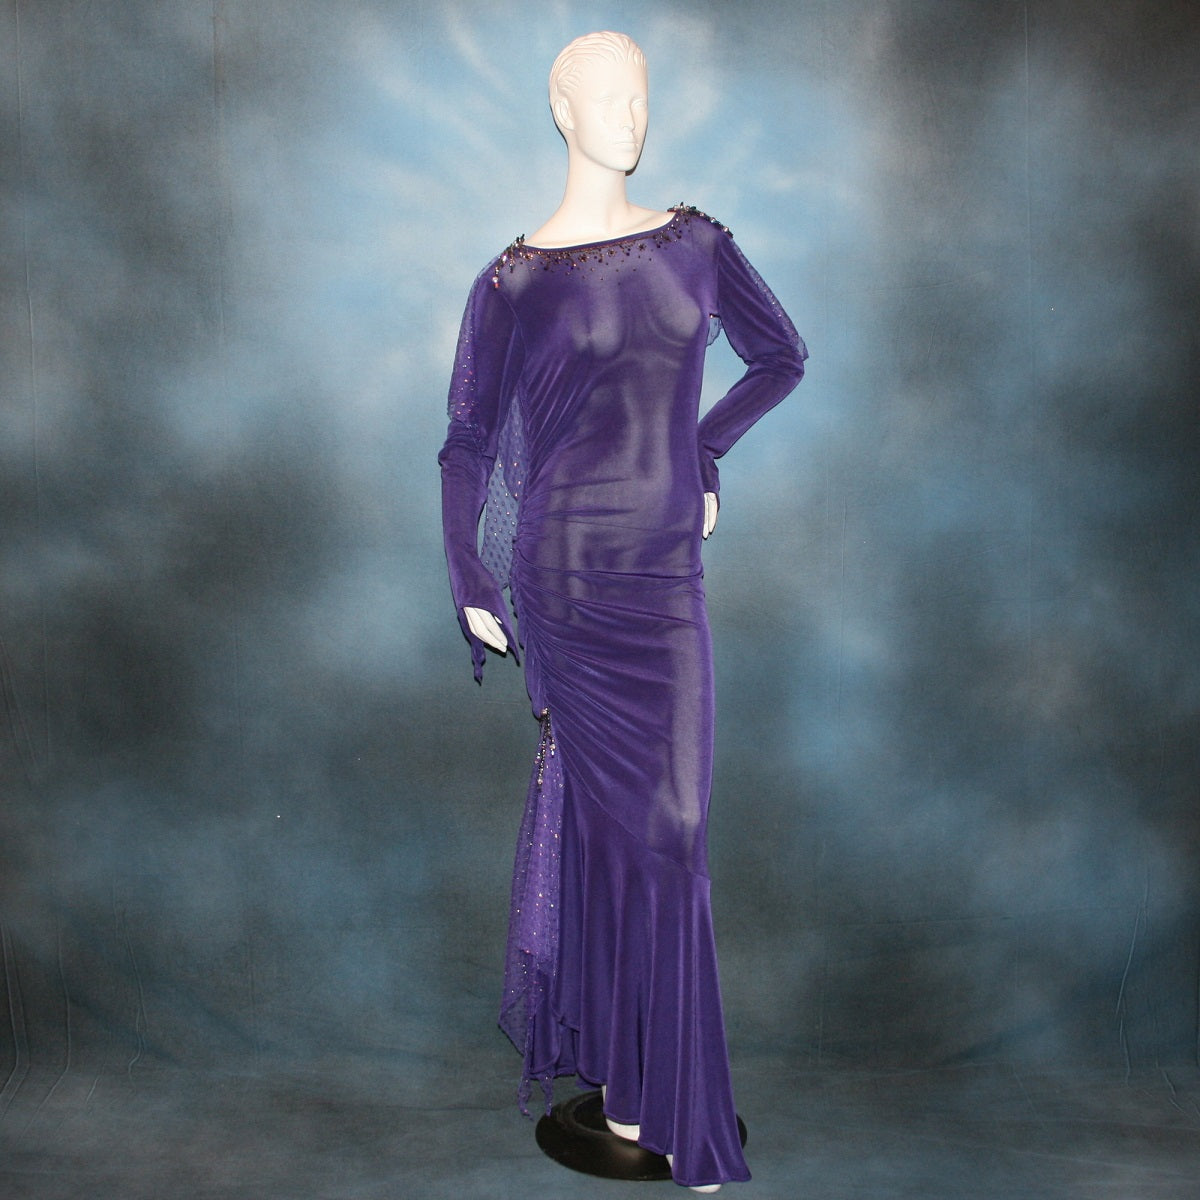 Crystal's Creations Purple Latin/rhythm/tango dress created of deep grape purple solid slinky with a touch of Swarovski rhinestone work done in metallic light gold & deep velvet purple, along with some hand beading & some gorgeous glittery floats.